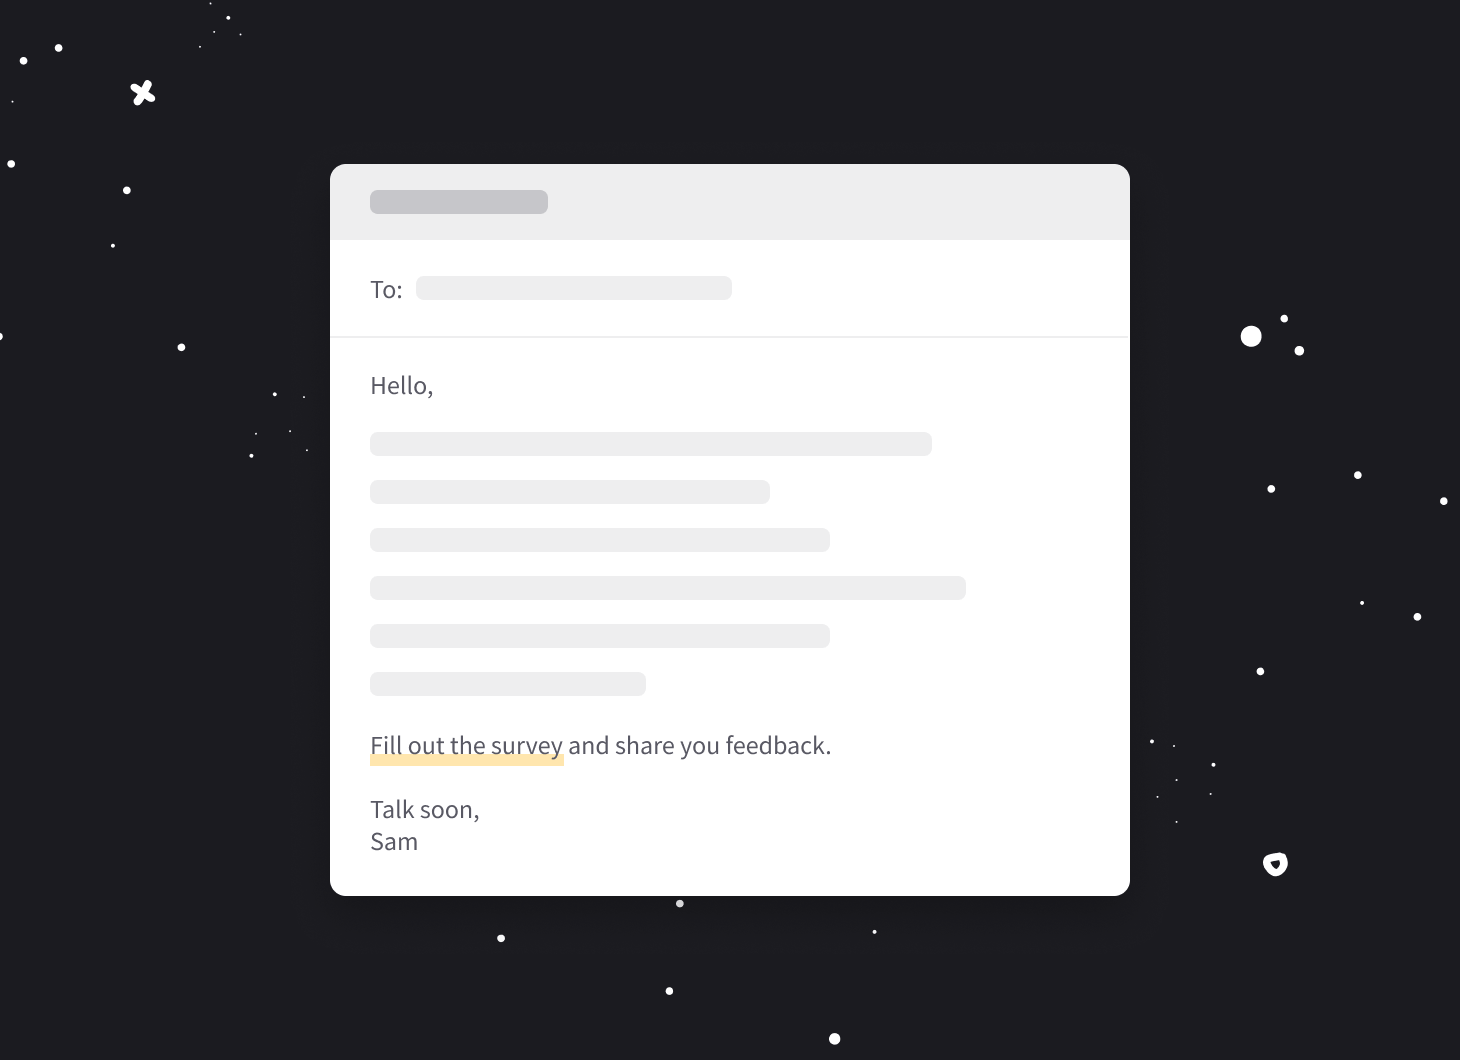 Email with sample text. Background with stars and the moon.